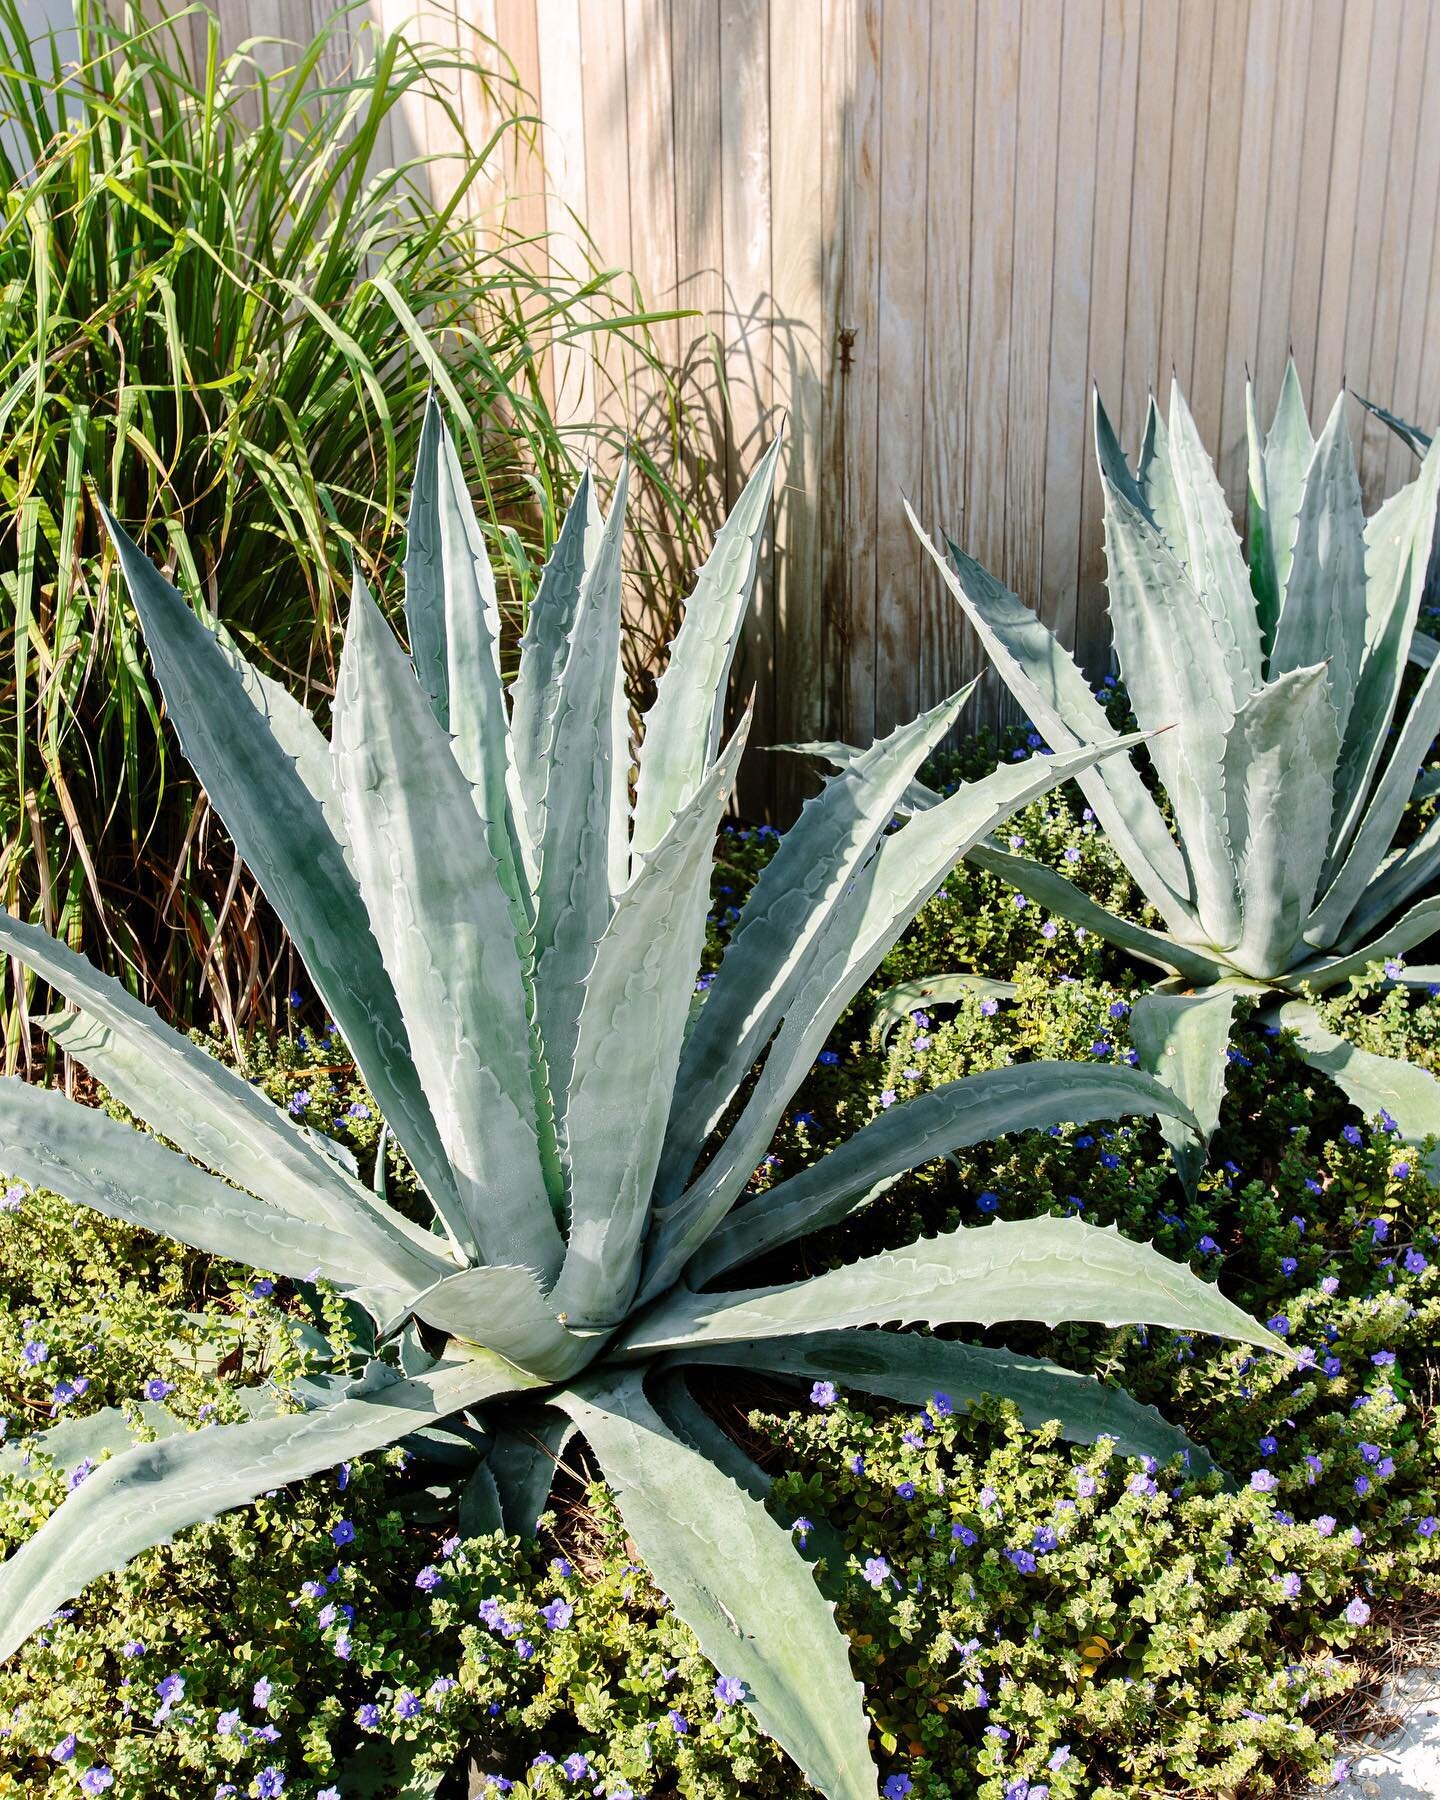 Everything&rsquo;s better in pairs, especially Agave Americanas! 😍 #seapinelandscape